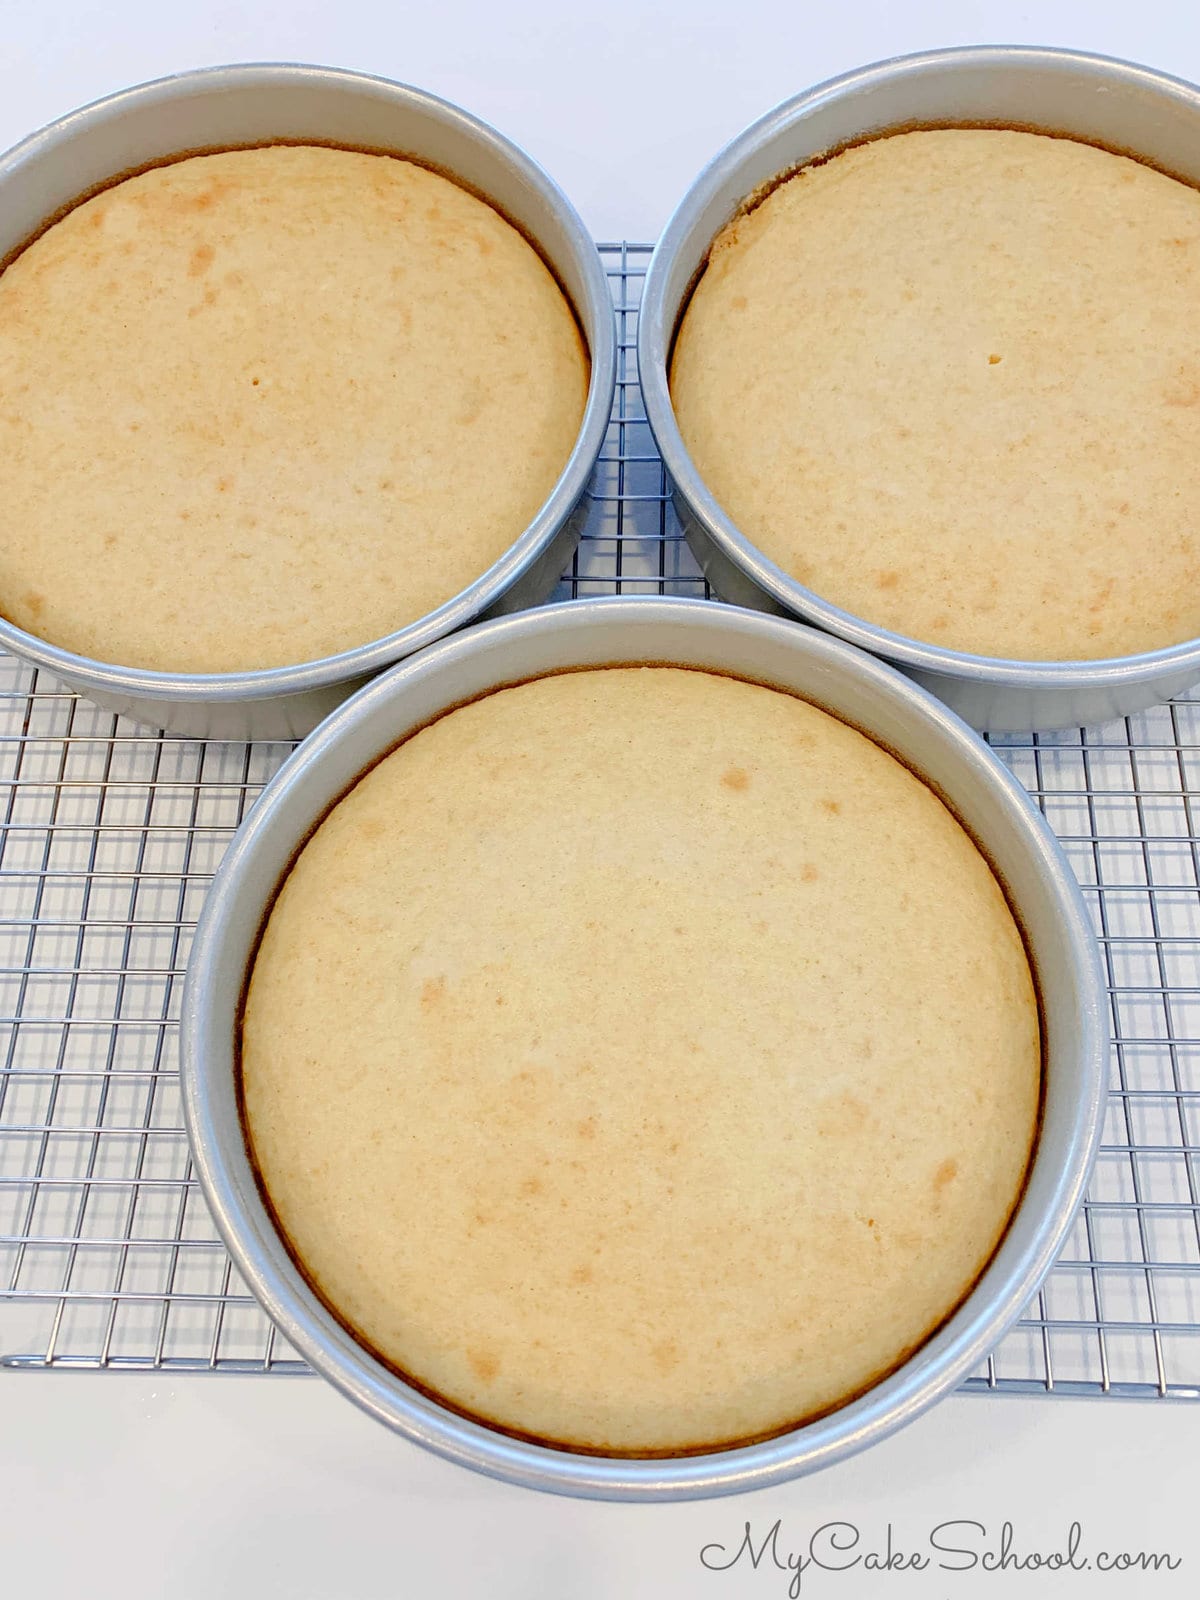 Three freshly baked cake layers in pans